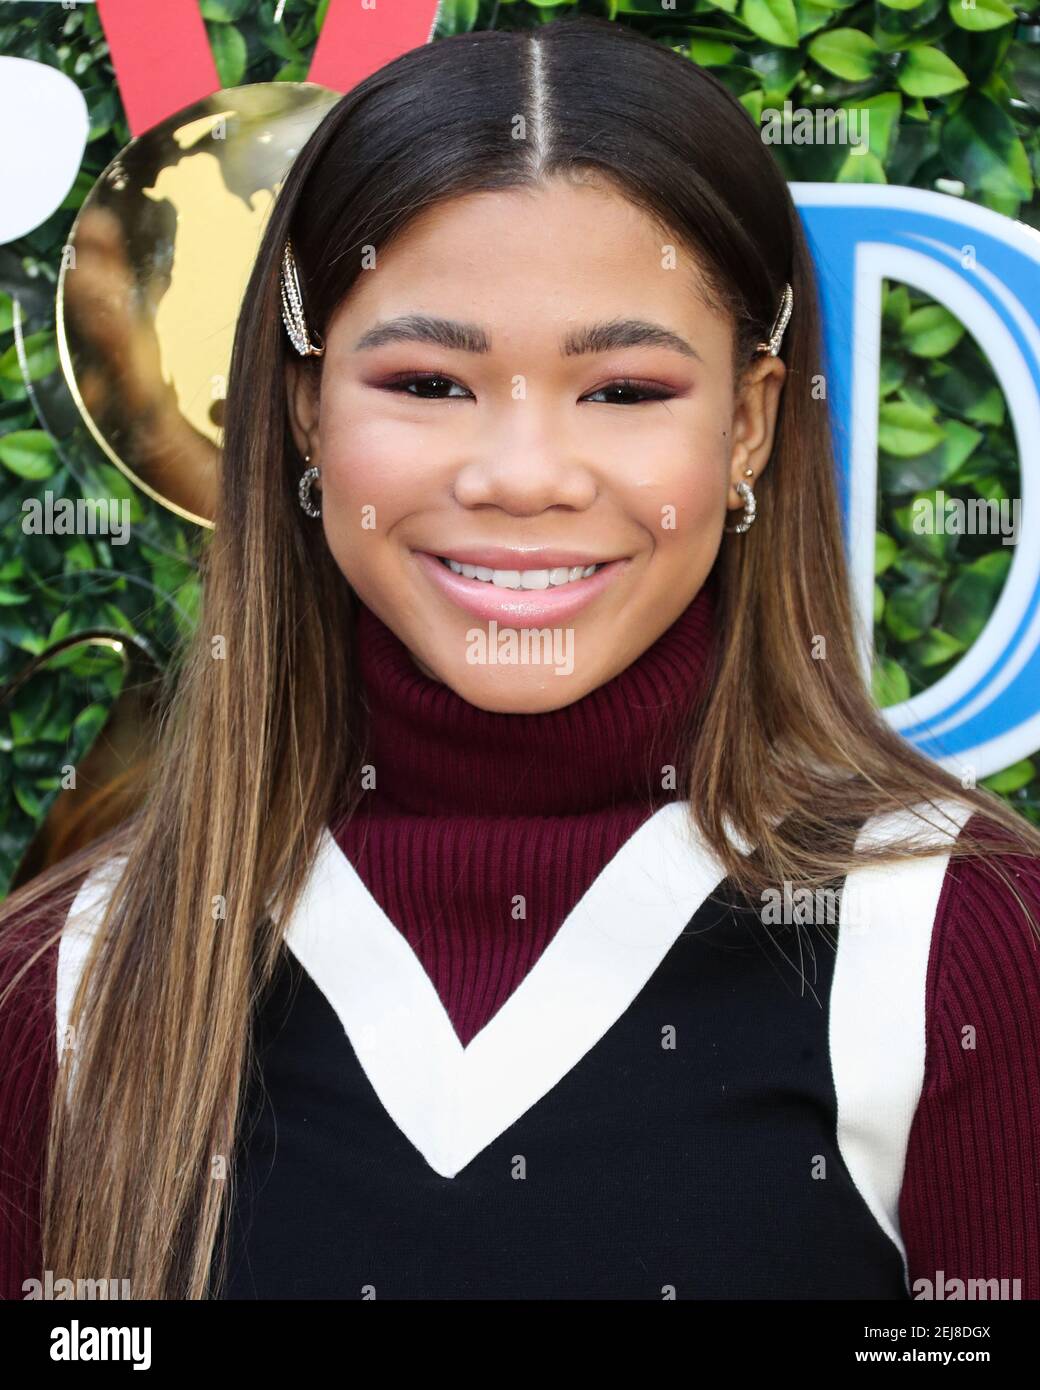 BEVERLY HILLS, LOS ANGELES, CALIFORNIA, USA - JANUARY 04: Actress Storm  Reid wearing Tommy Hilfiger x Zendaya arrives at the 7th Annual Gold Meets  Golden Event held at Virginia Robinson Gardens and